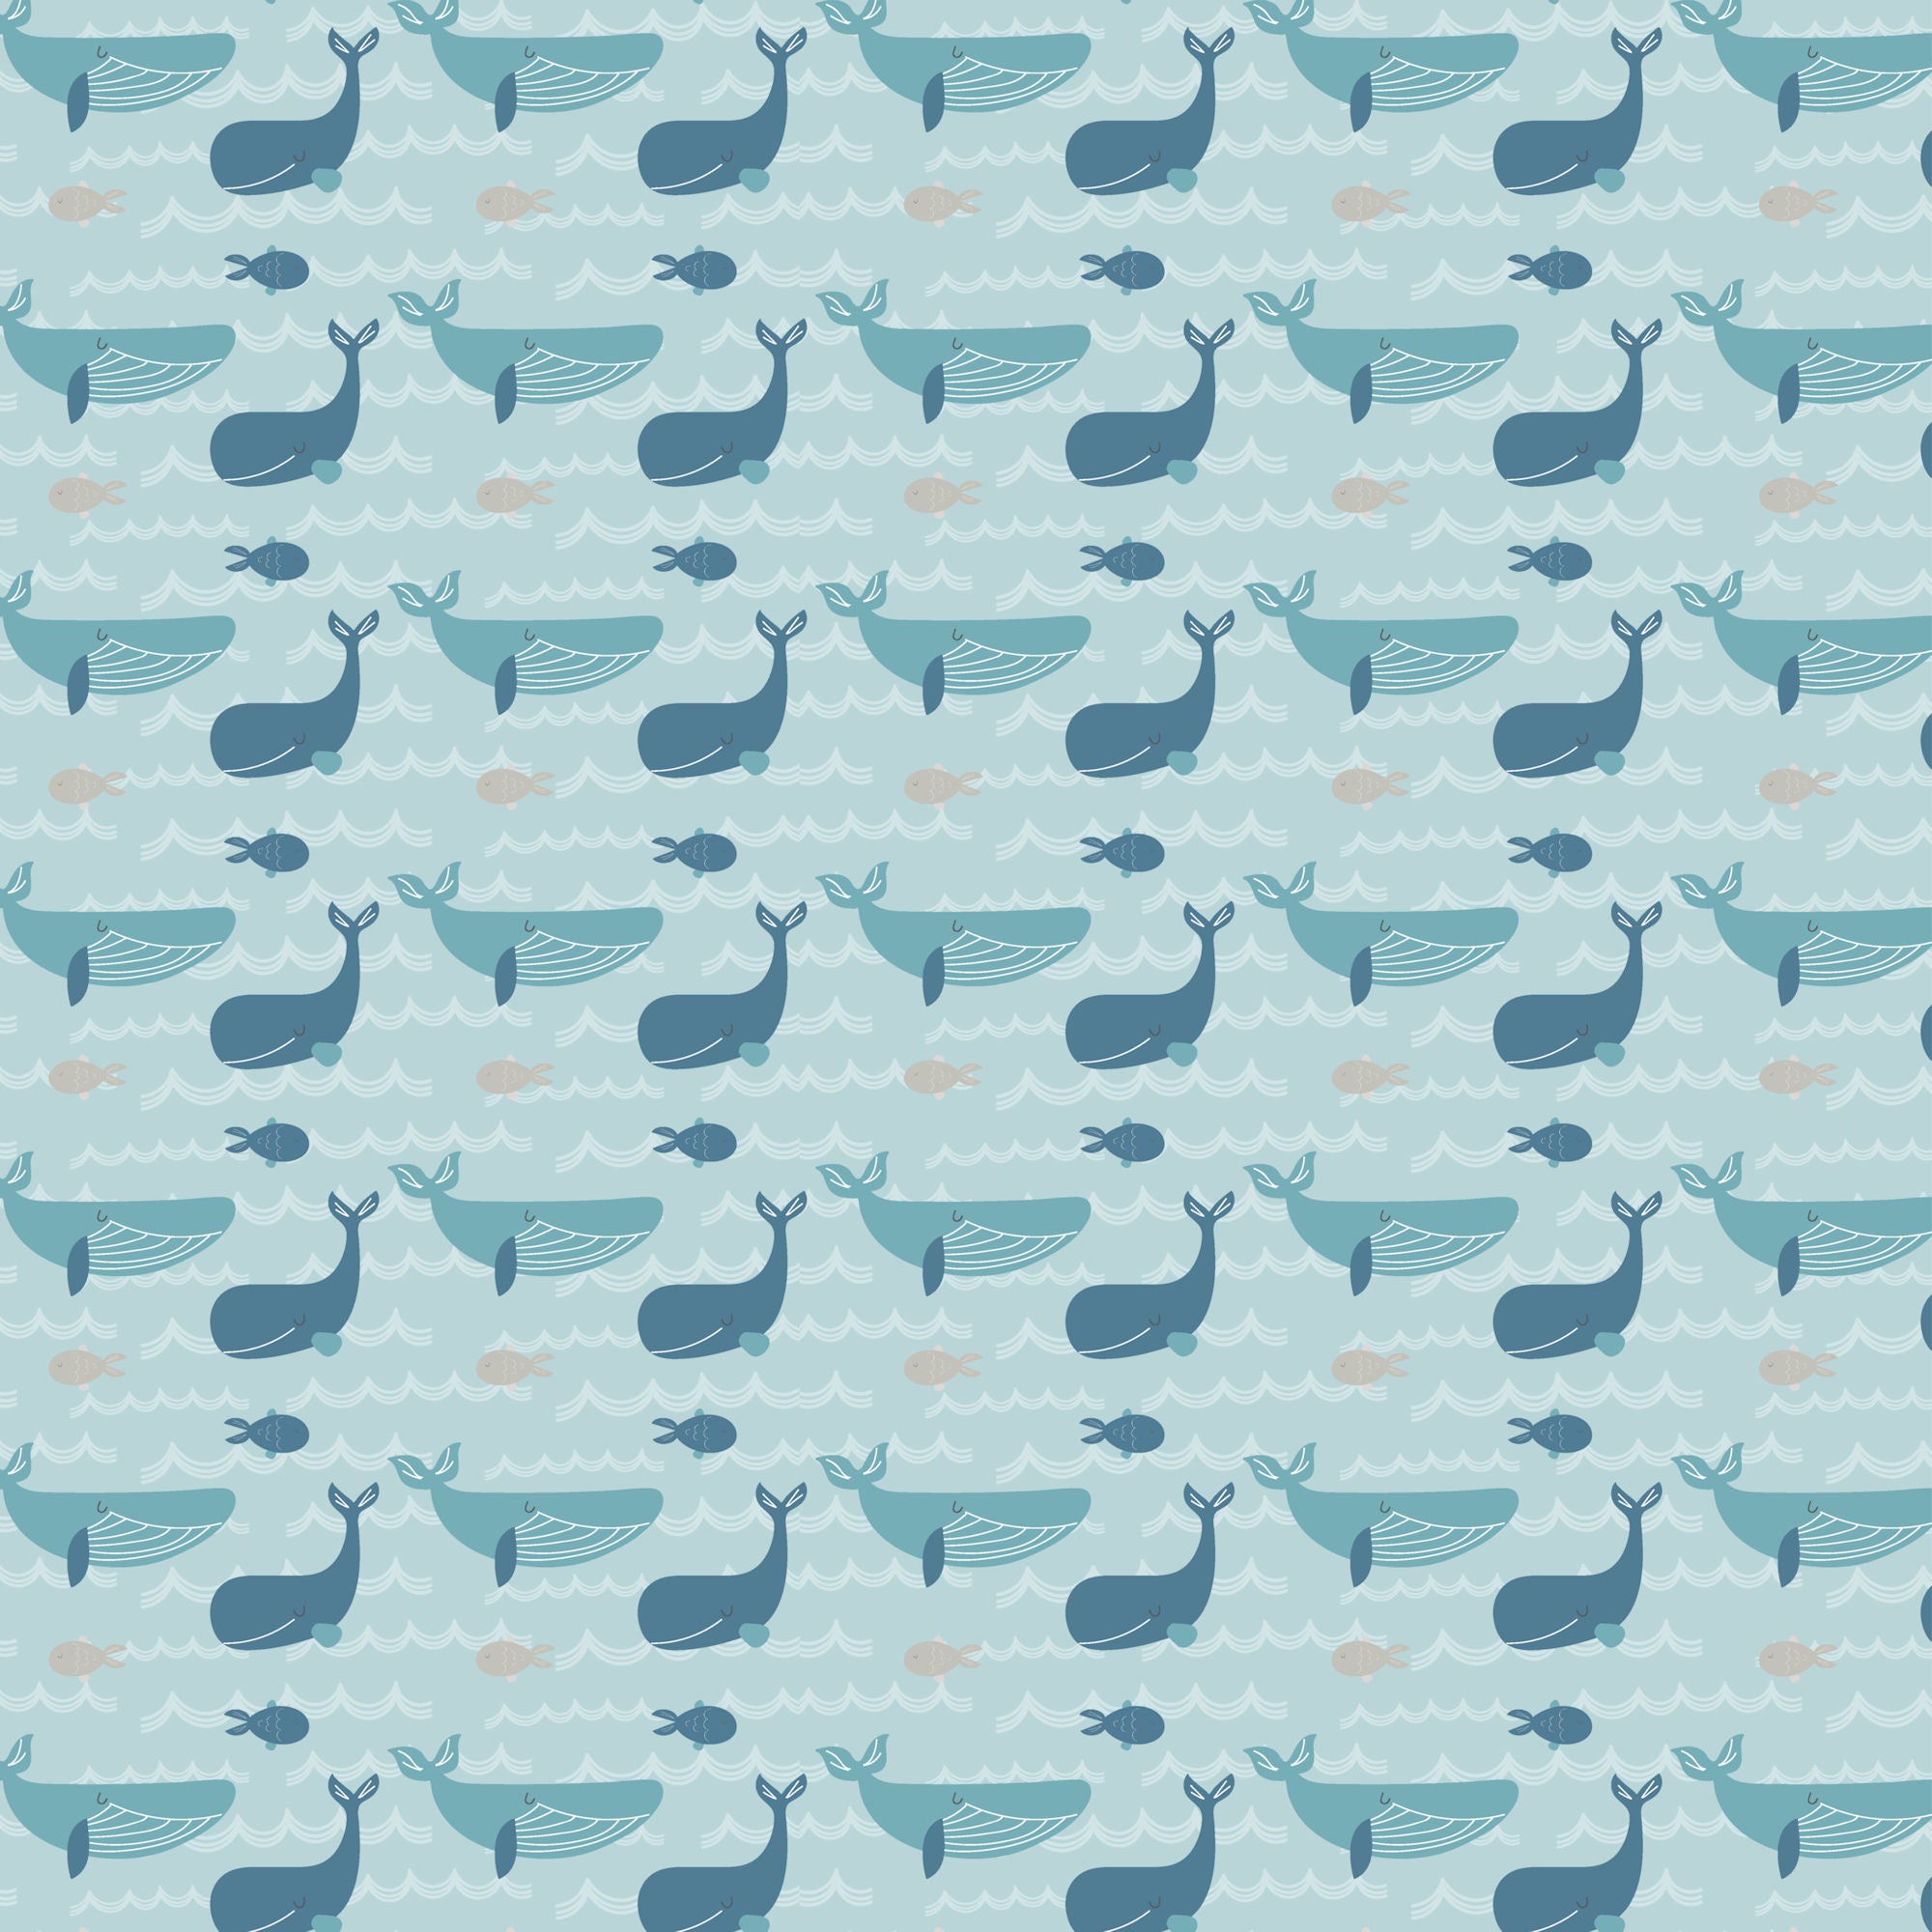 By The Sea Collection Whale Of A Good Time 12 x 12 Double-Sided Scrapbook Paper by SSC Designs